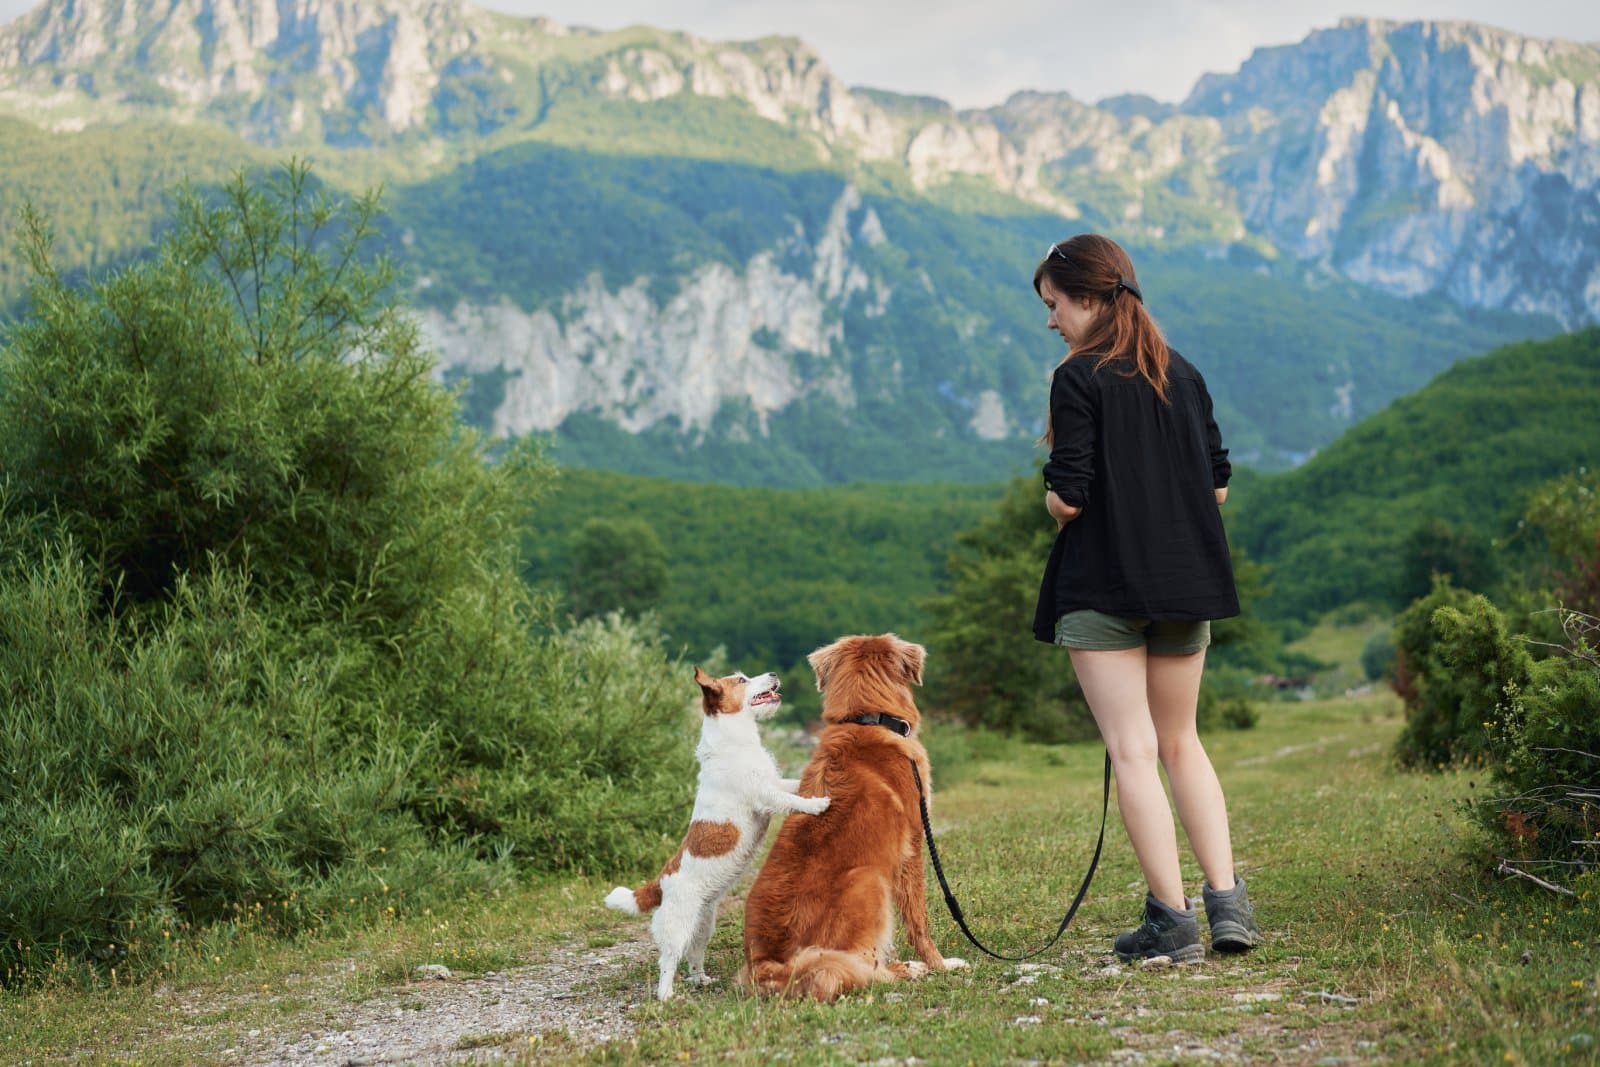 <p class="wp-caption-text">Image Credit: Shutterstock / dezy</p>  <p><span>Bringing your pet along on your adventures is often easier when you stay in the U.S., with many hotels, parks, and attractions offering pet-friendly options.</span></p>